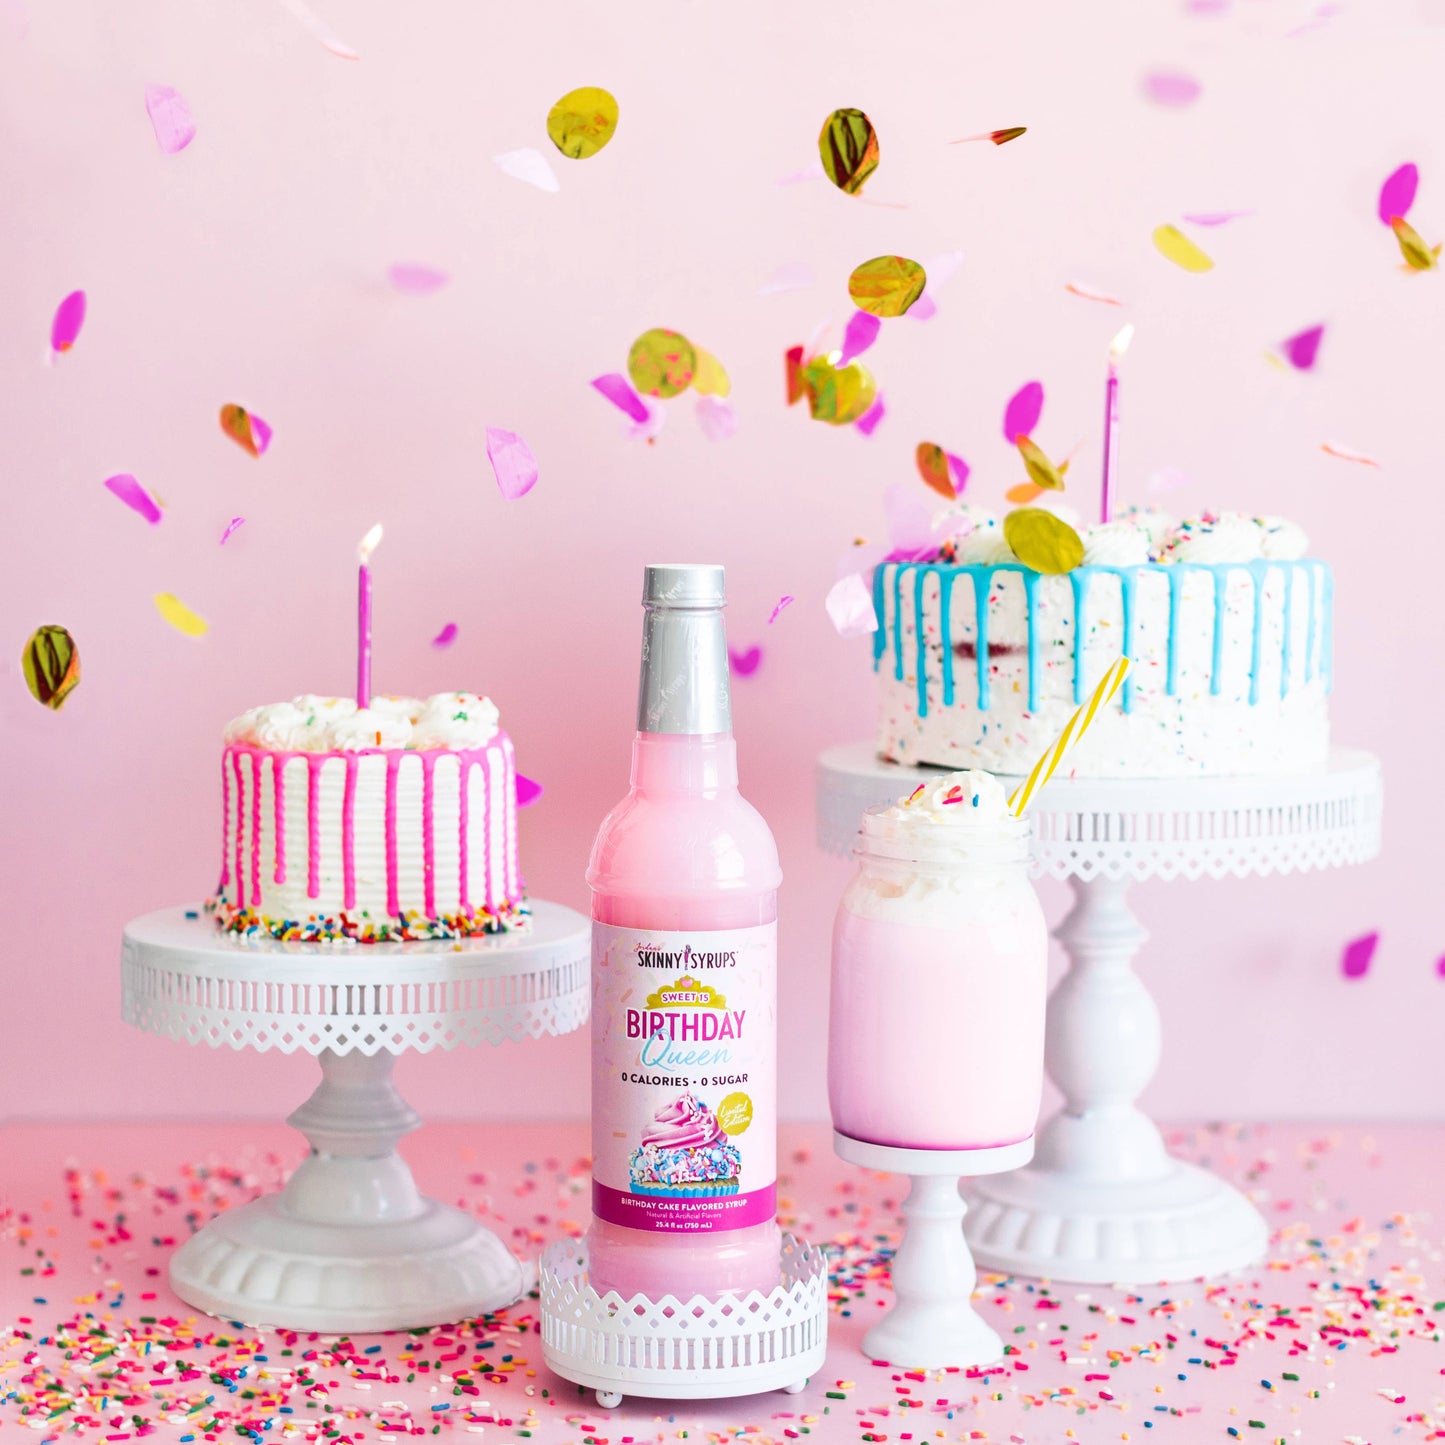 SKINNY BIRTHDAY QUEEN SYRUP - A.K.A. Birthday Cake Syrup